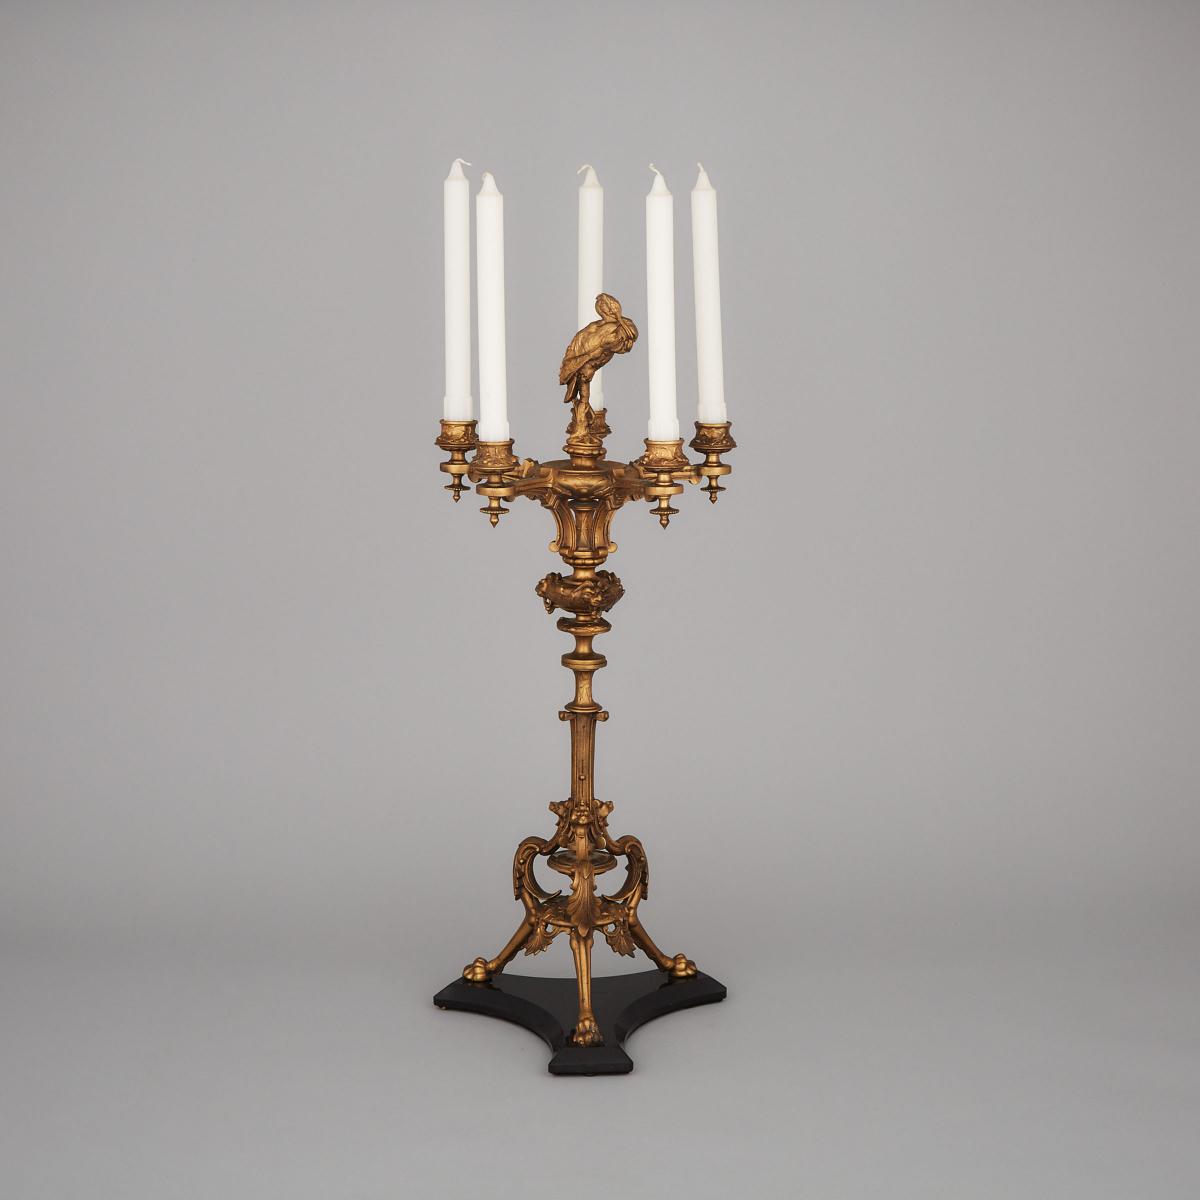 French Gilt Bronze Neo-Grec Candelabra, late 19th century, height 25 in — 63.5 cm